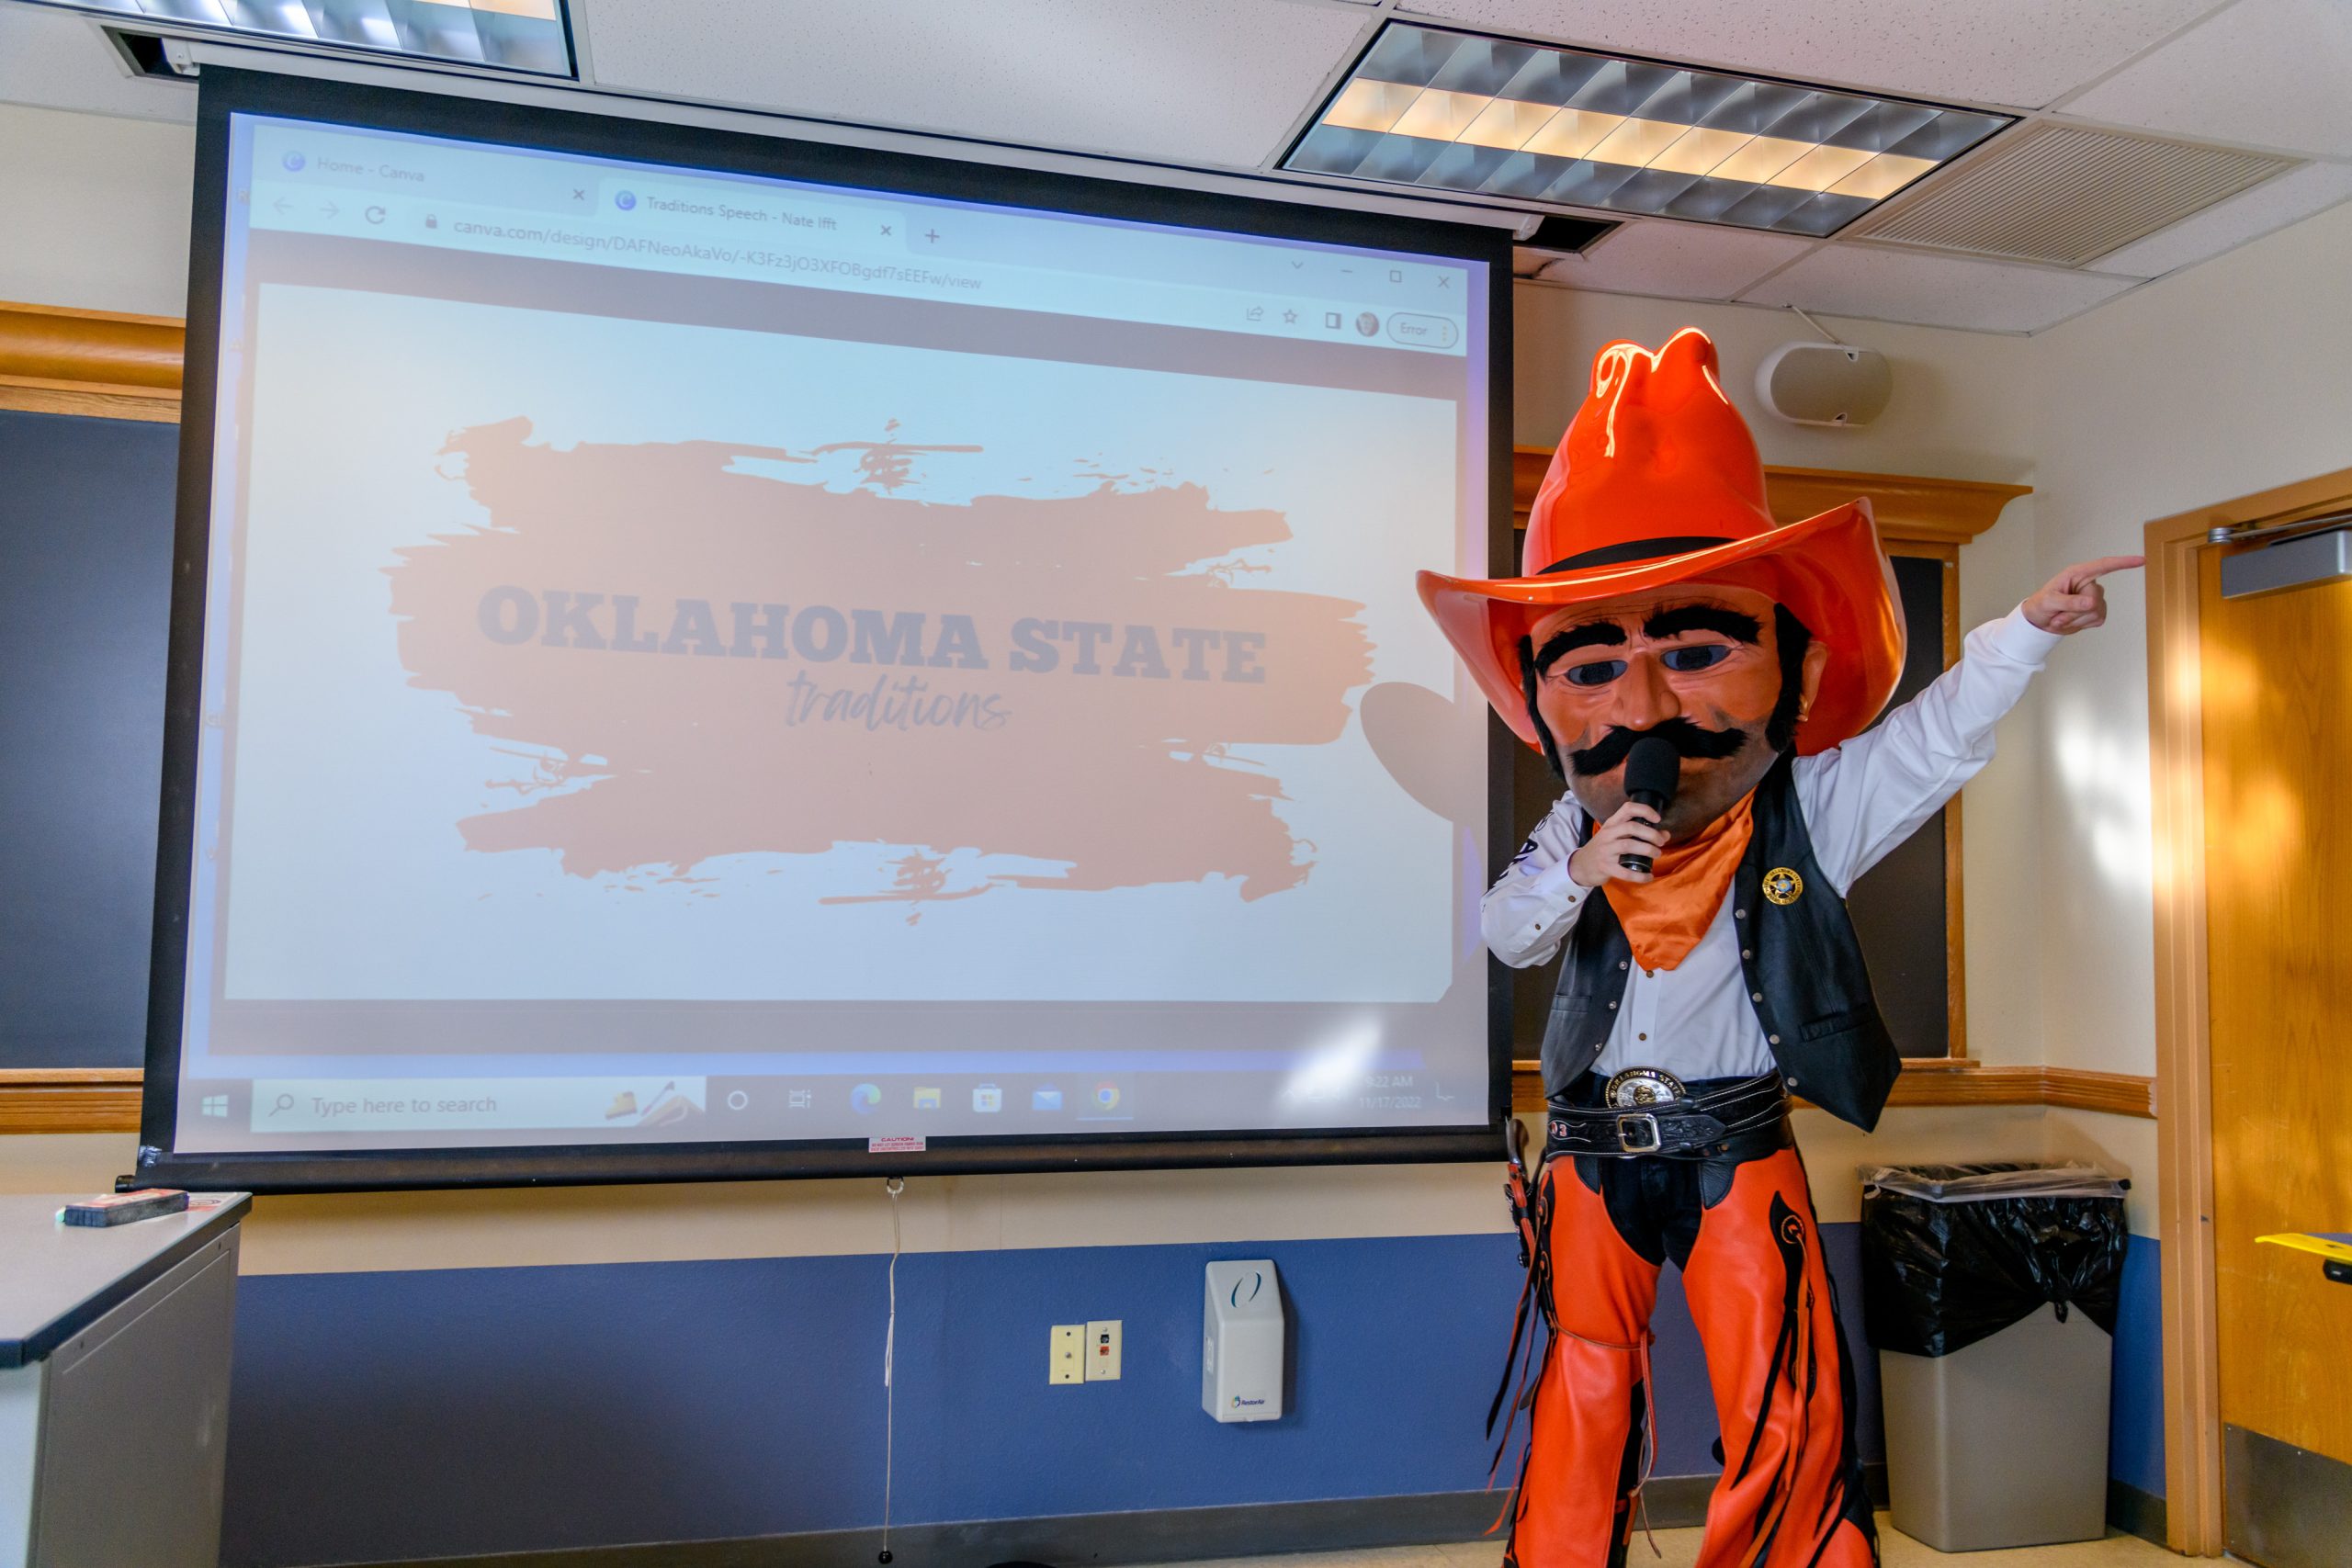 The OSU mascot, Pistol Pete stands at the front of a classroom holding a microphone while giving a presentation